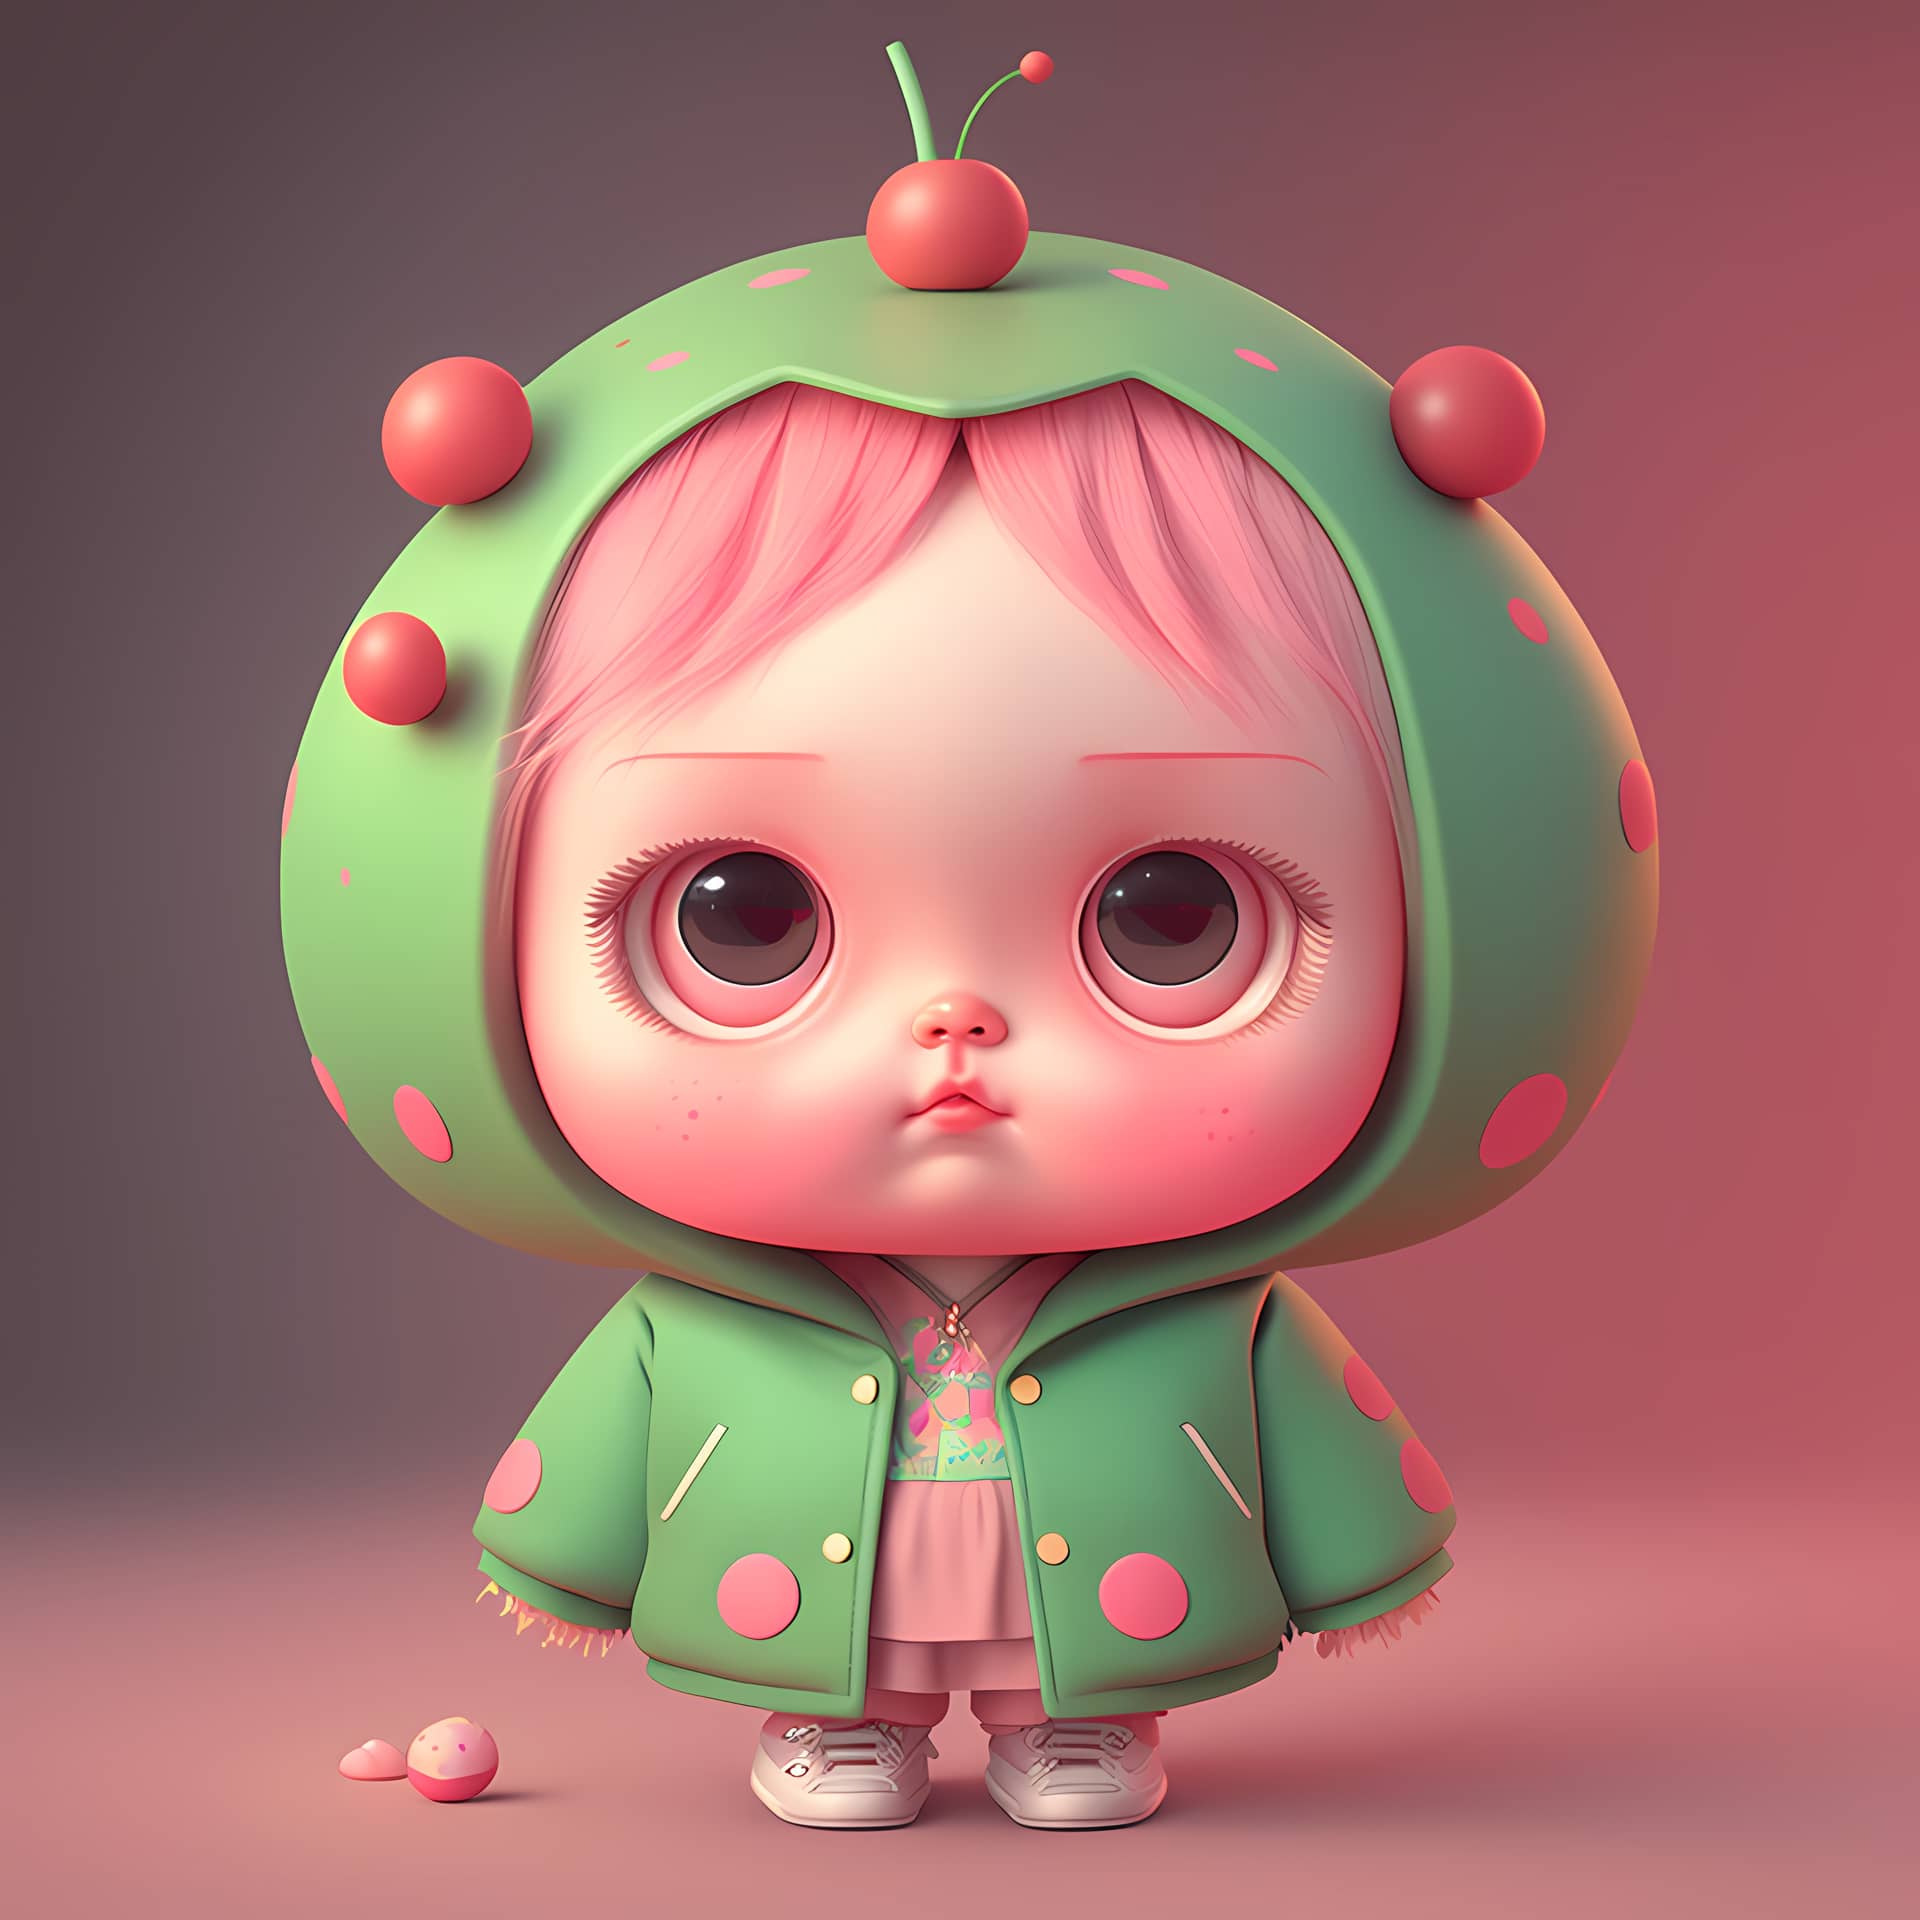 Cute profile photos 3d design character adorable cute illustration nice picture